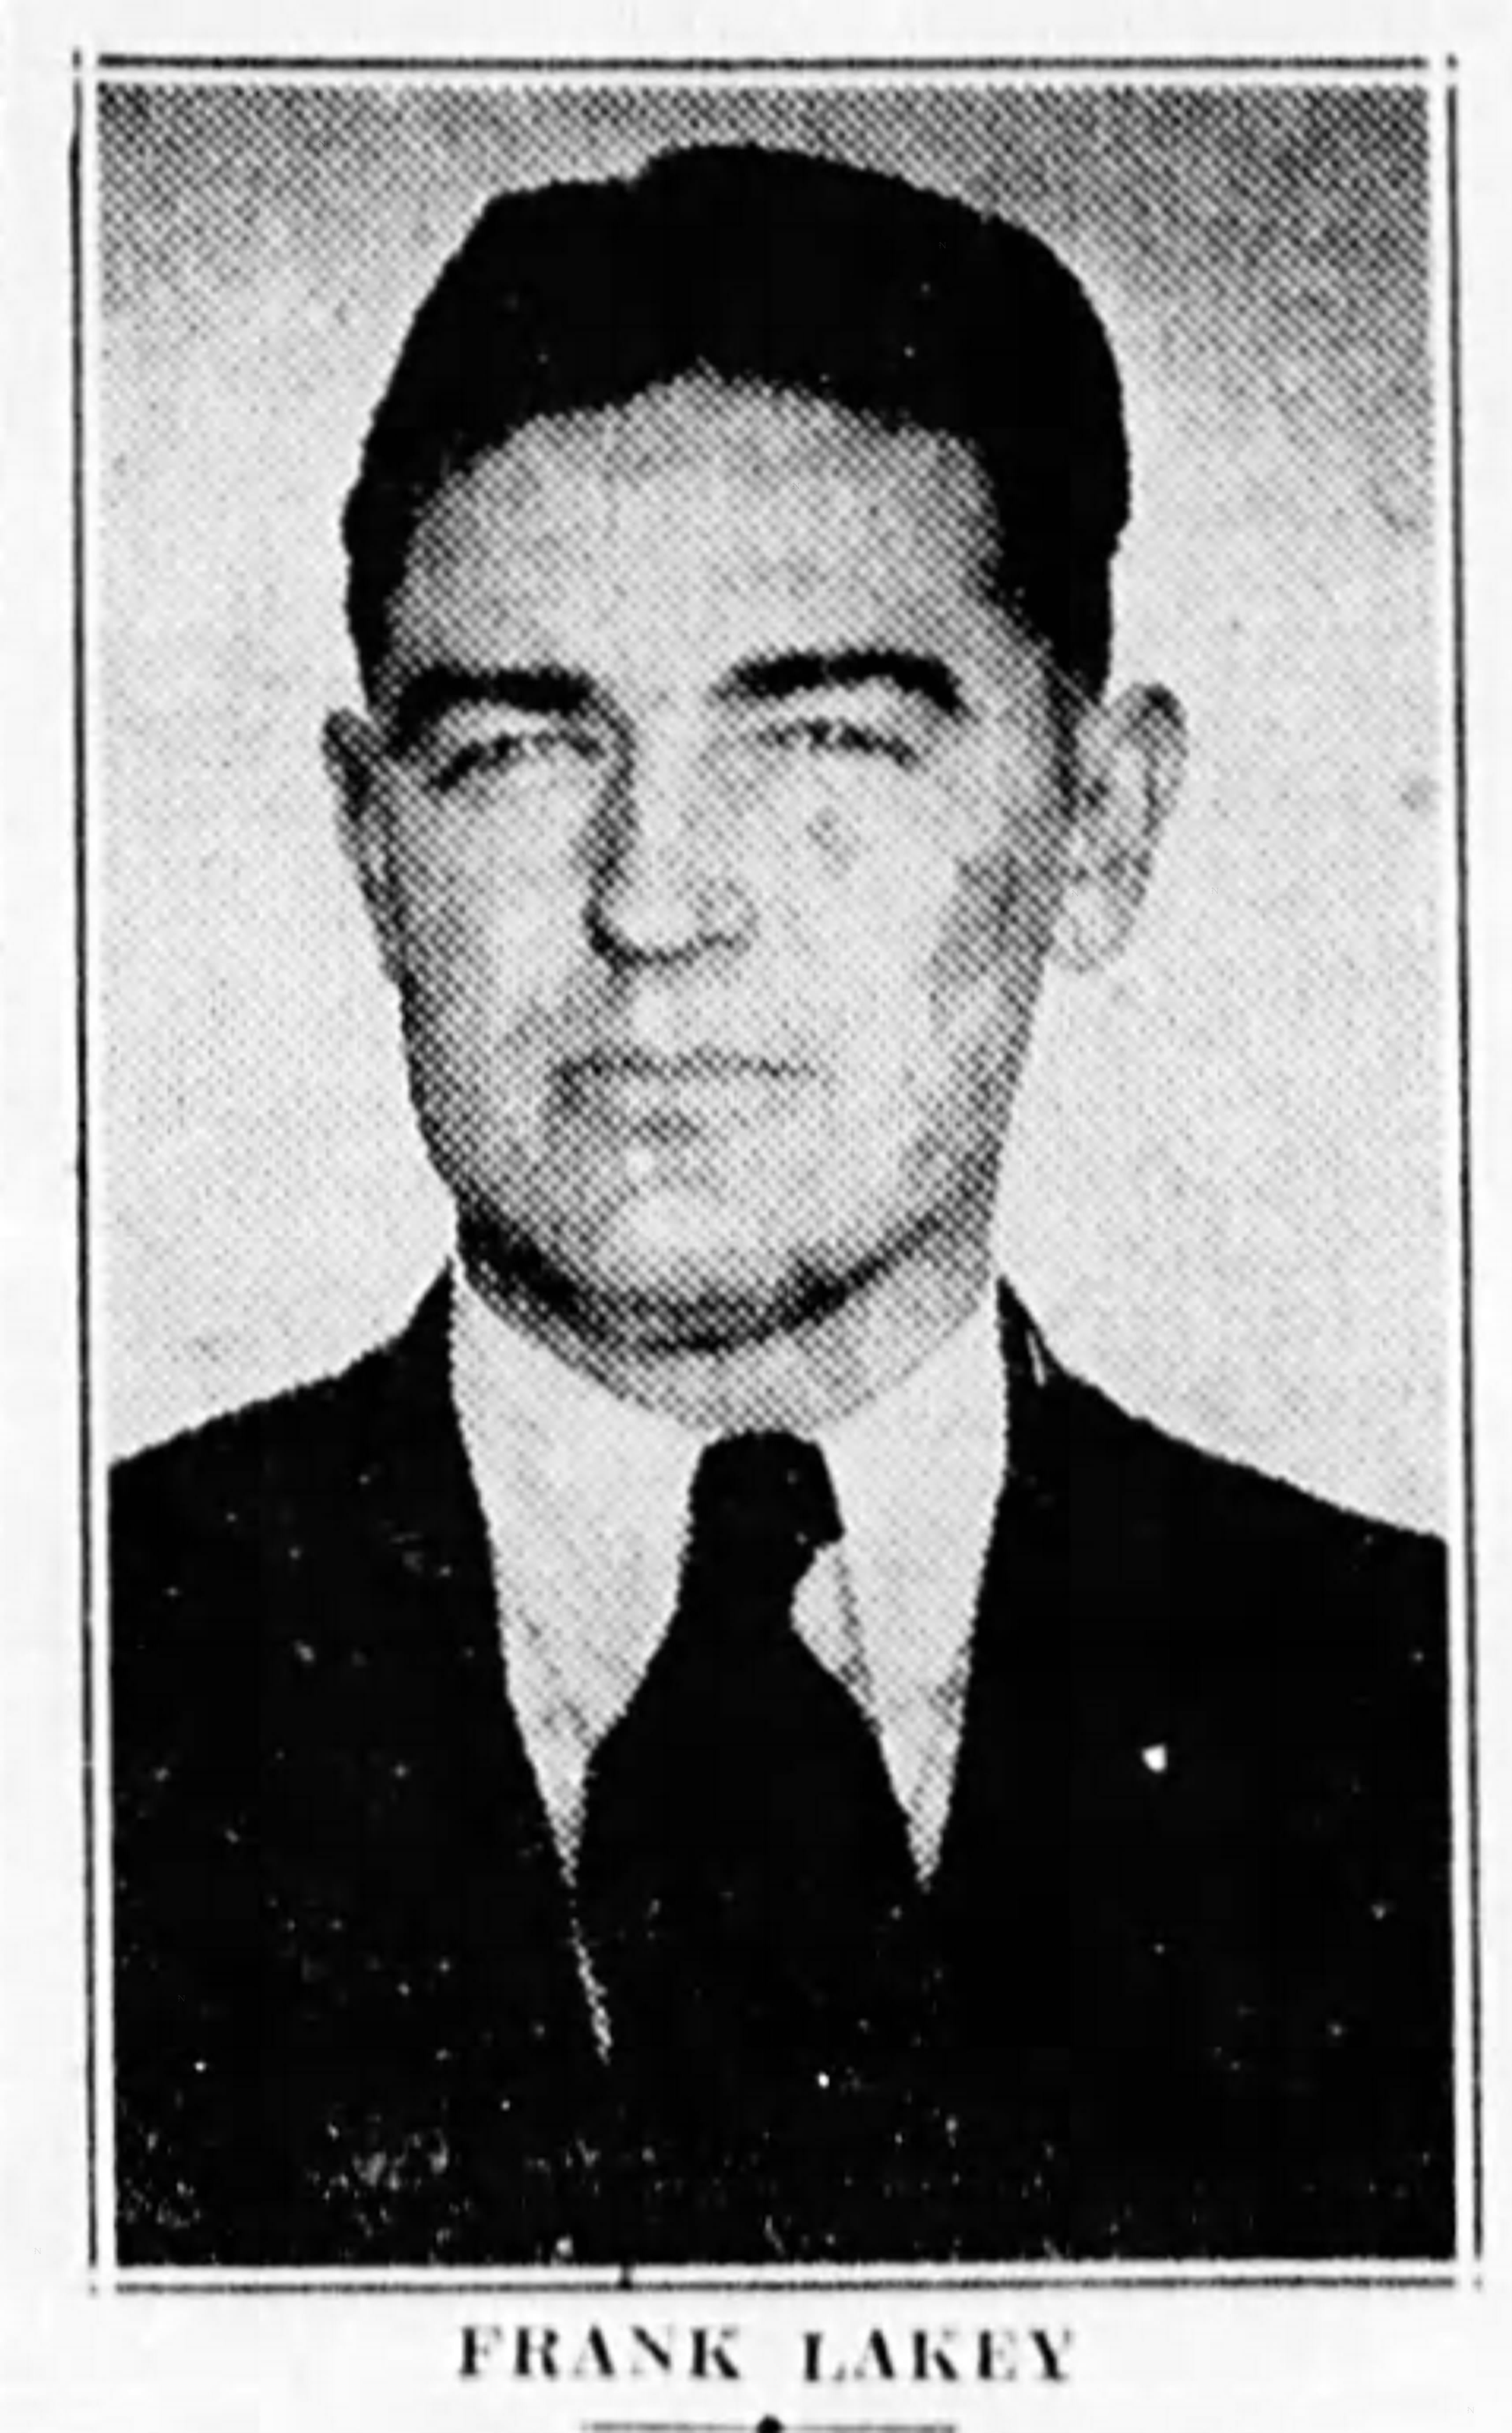 Railroad Detective Frank B. Lakey | Southern Railway Police Department, Railroad Police